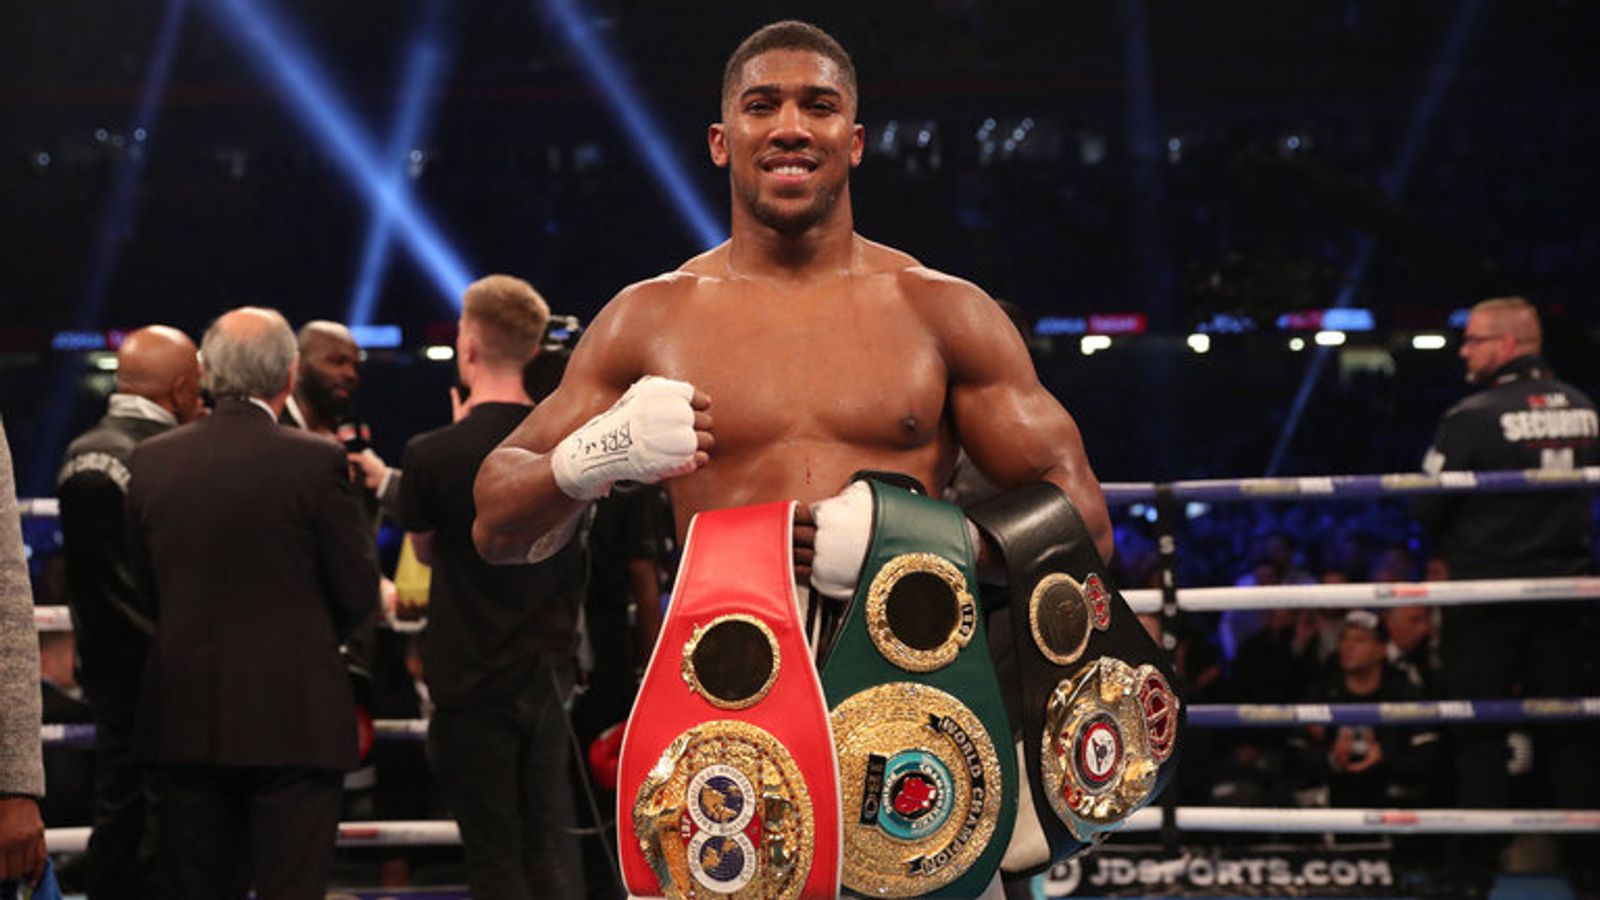 Anthony Joshua: Relive two-time heavyweight champion’s defining moments ahead of Oleksandr Usyk rematch